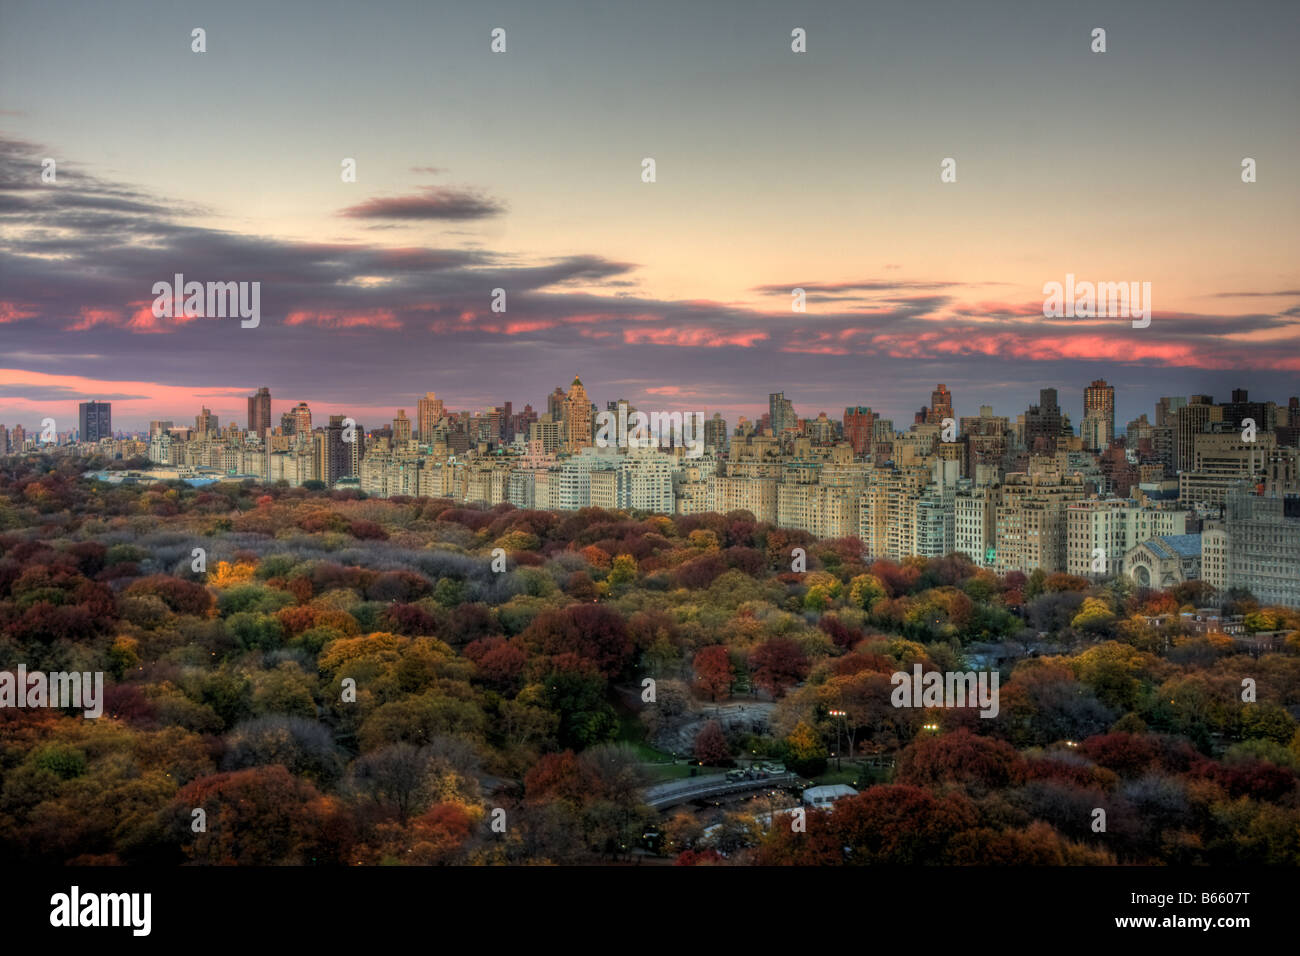 High Dynamic Range image of Central Park. Taken from the 27th floor of the Essex House Hotel in New York City. Stock Photo